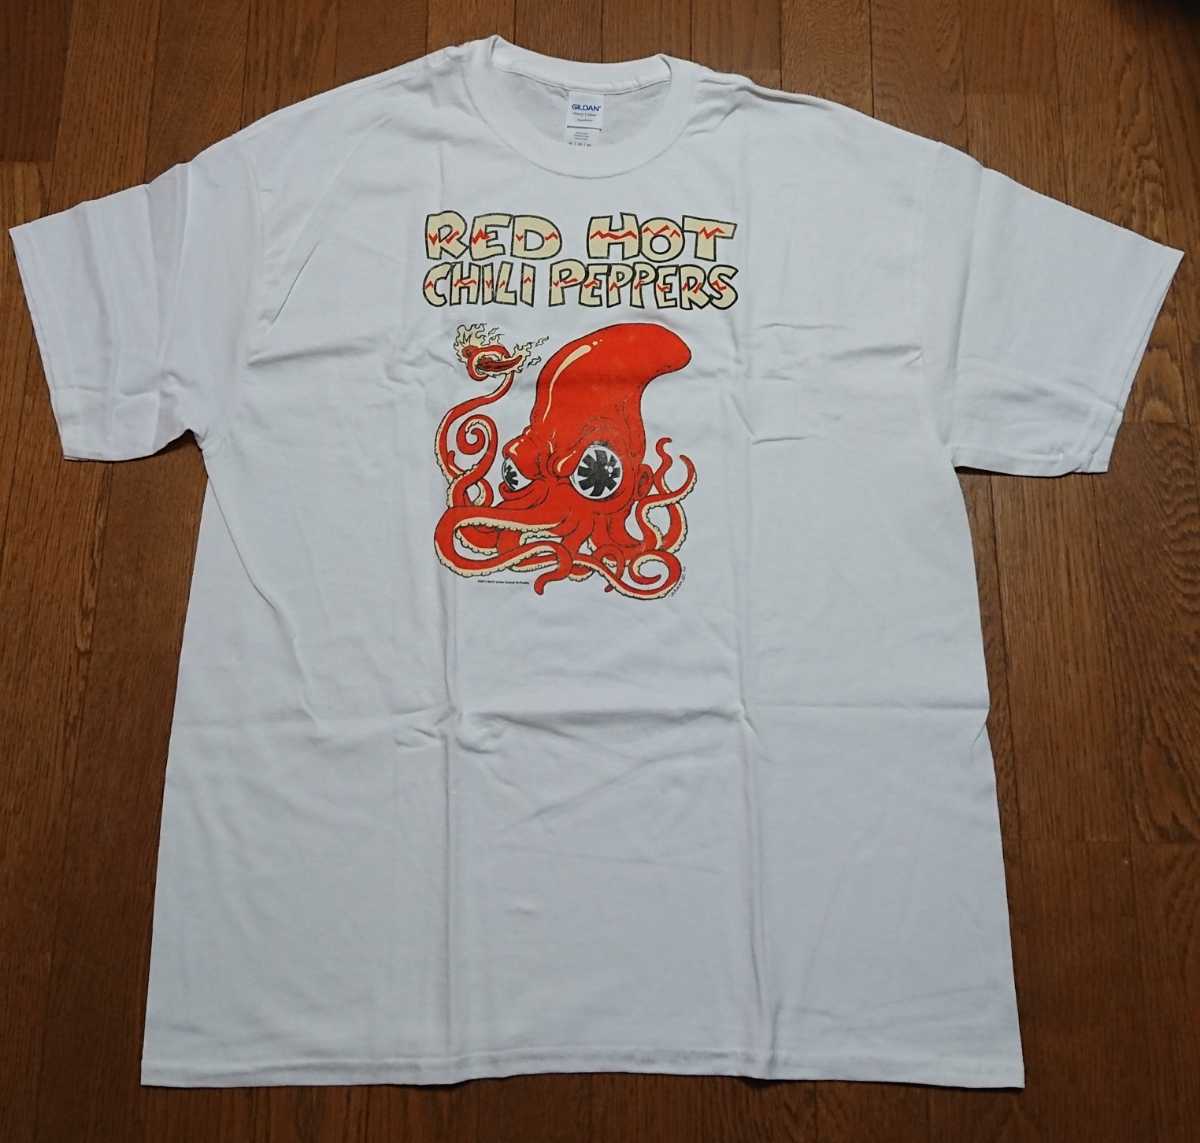 GILDAN製 red hot chili peppers Tシャツ XL 自宅保管未使用品 ／ Faith No More rage against the machine boredoms sublime cypress hill